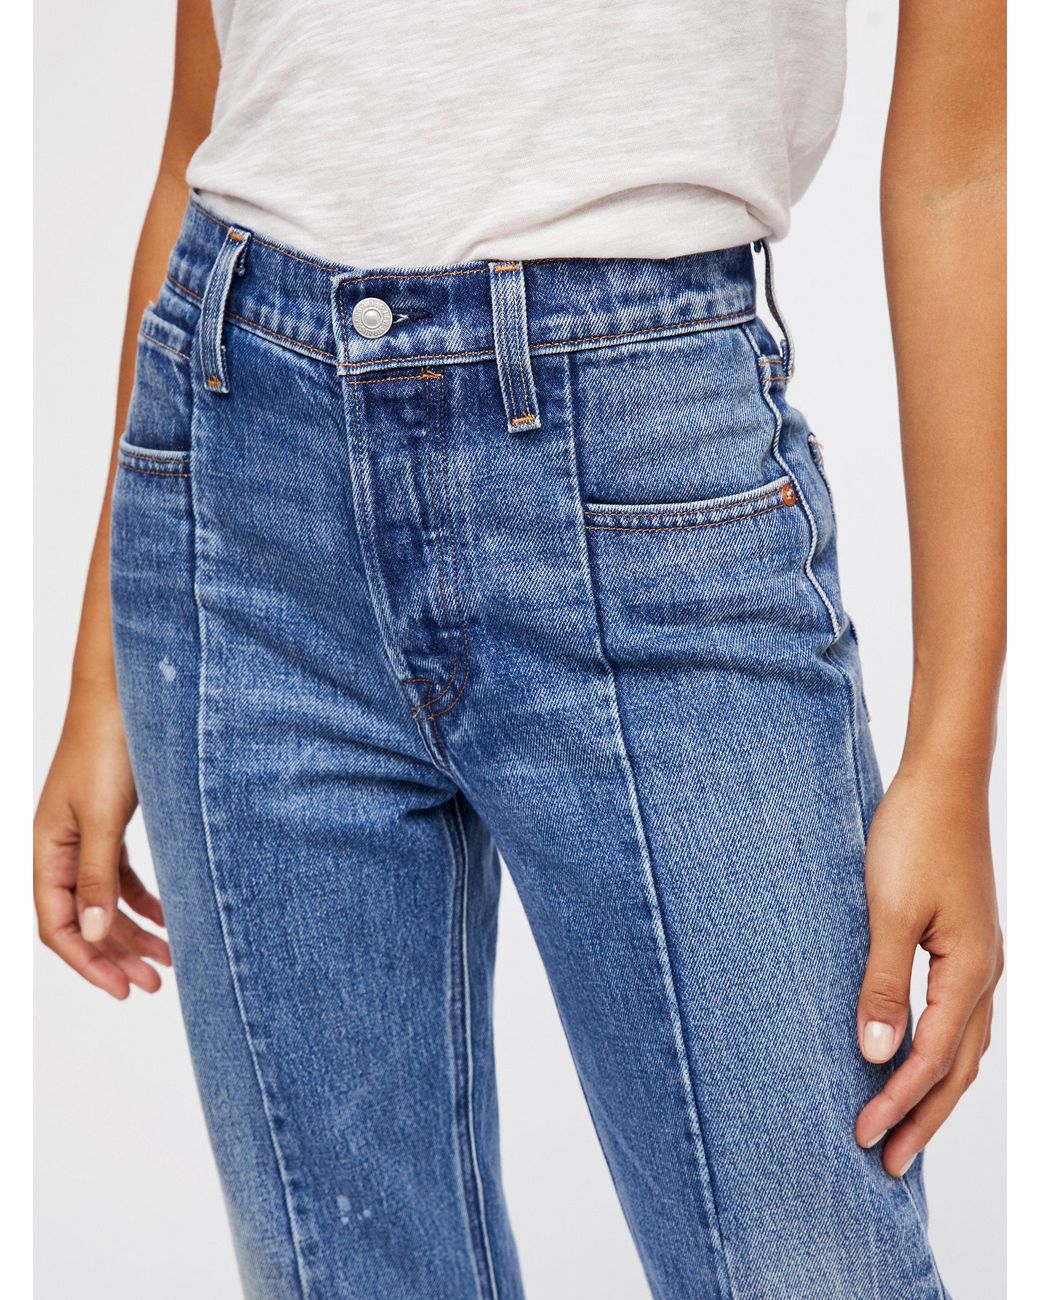 Free People Levi's Altered Straight Leg Jeans in Blue | Lyst UK